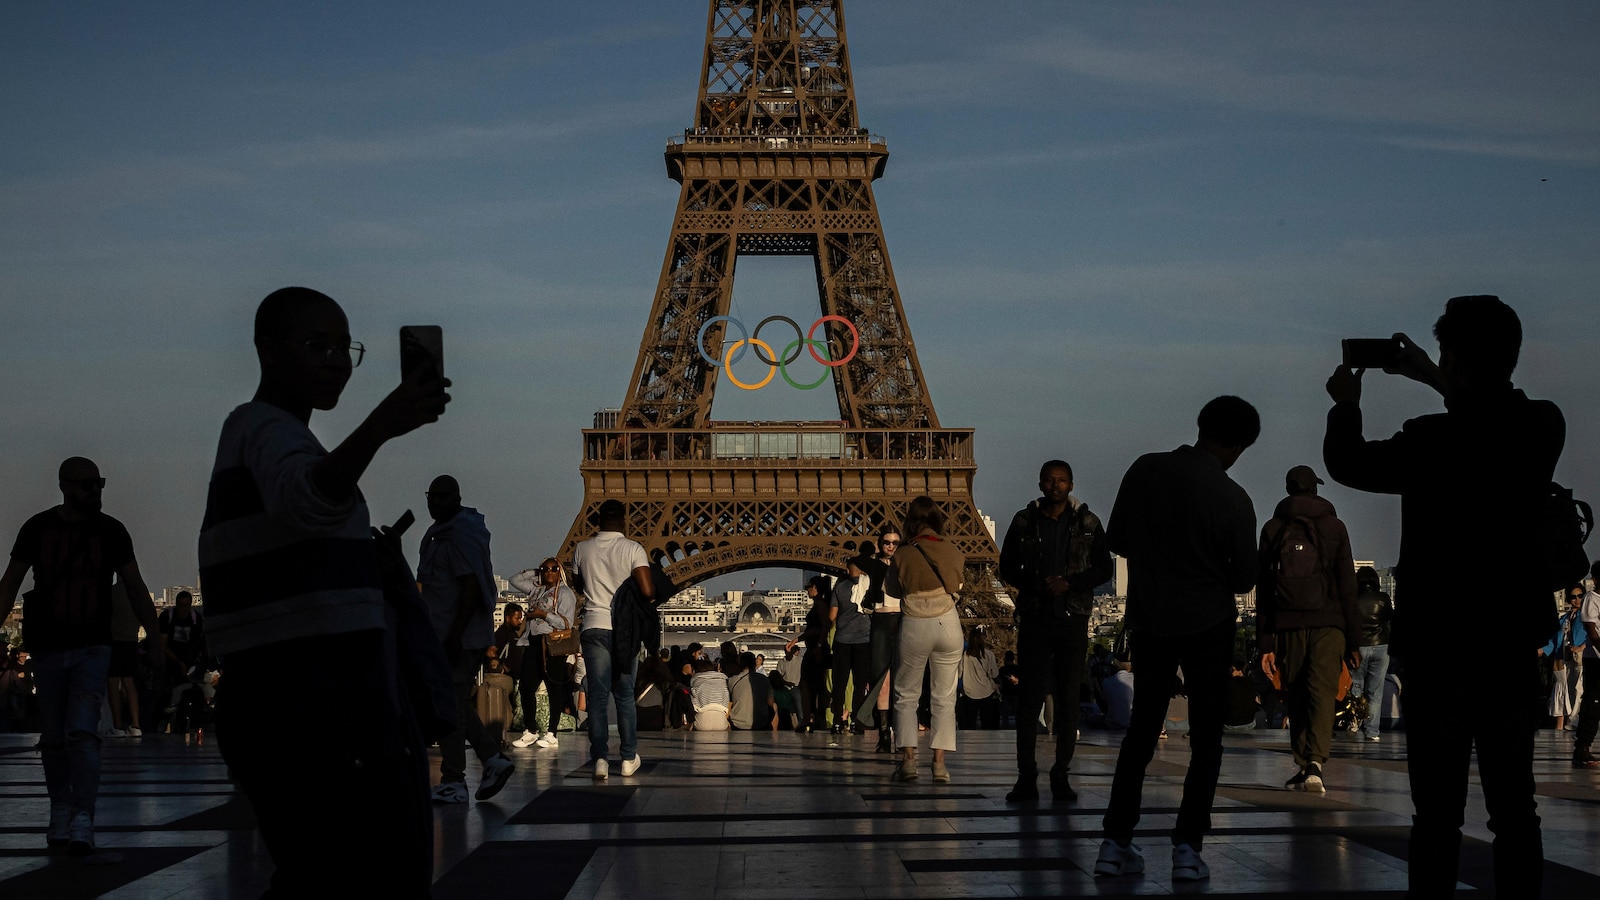 A new start for NBC's Olympics: no more 'plausible live' for the Paris Games this summer